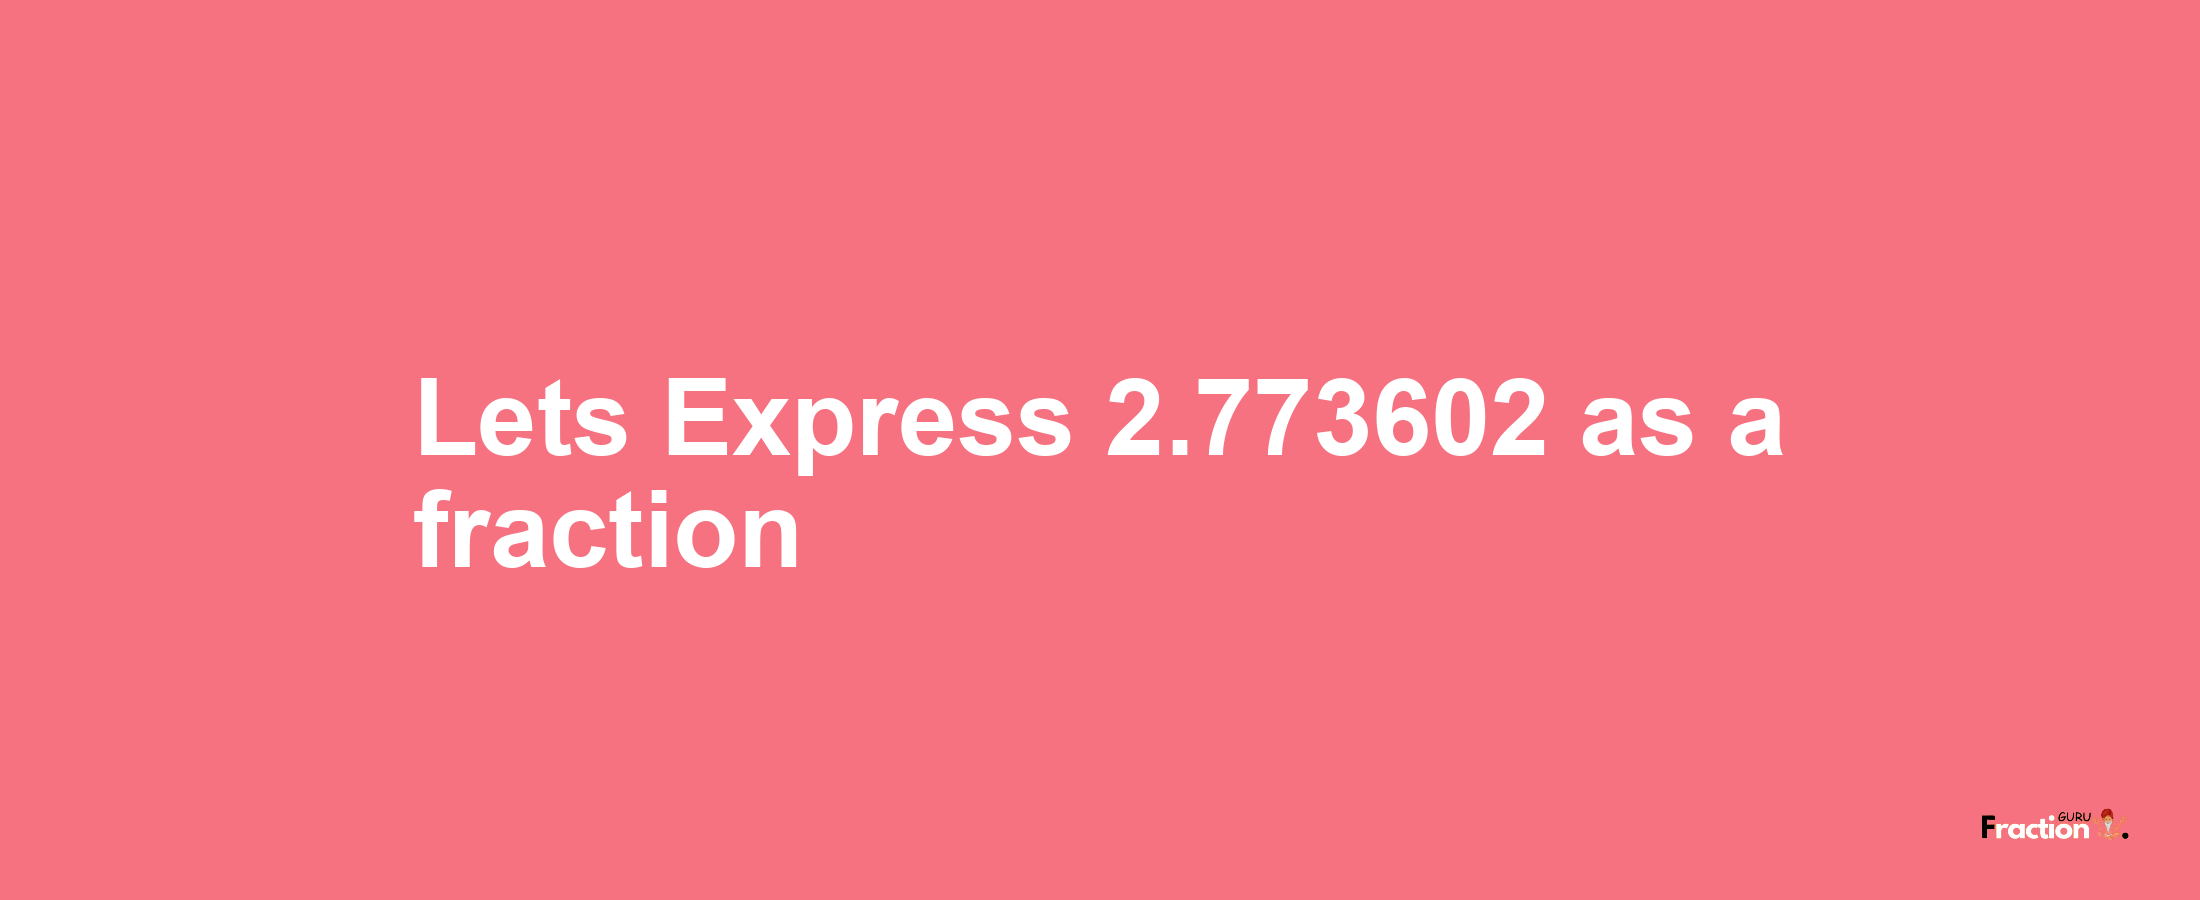 Lets Express 2.773602 as afraction